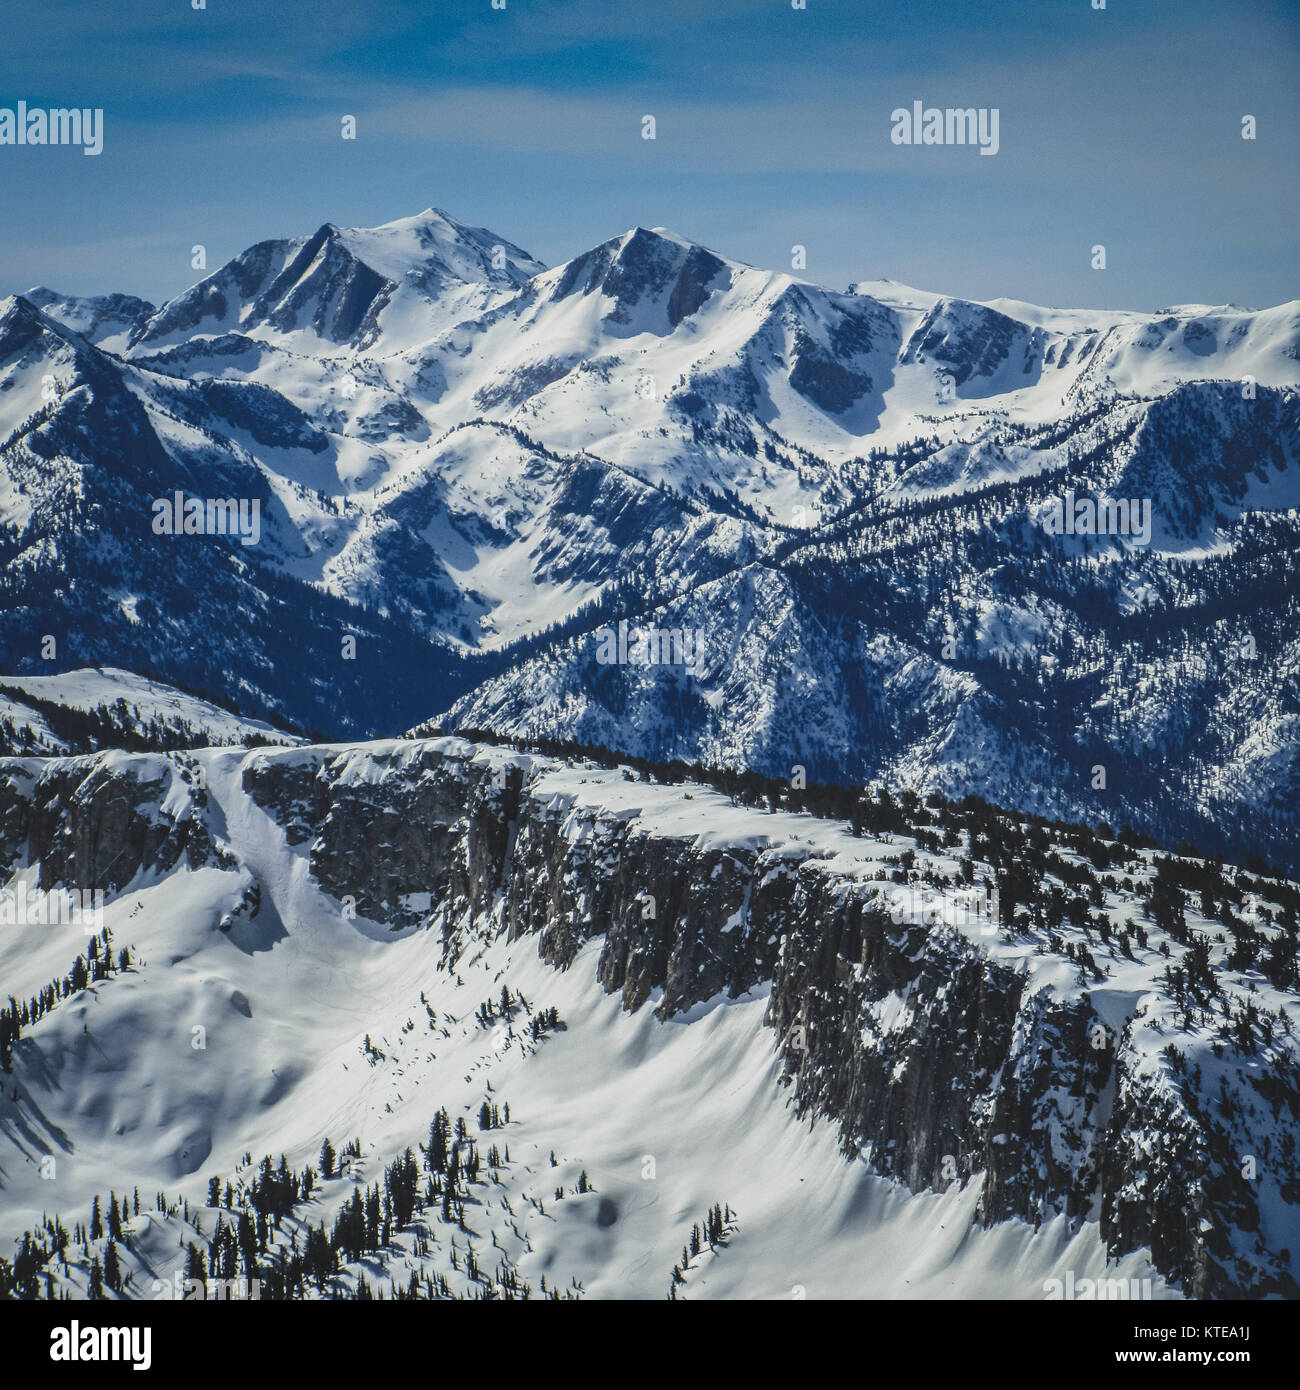 Scenic view of snow-covered Sierra Nevada Mountains from the summit of Mammoth Mountain, Mammoth Lakes, California Stock Photo